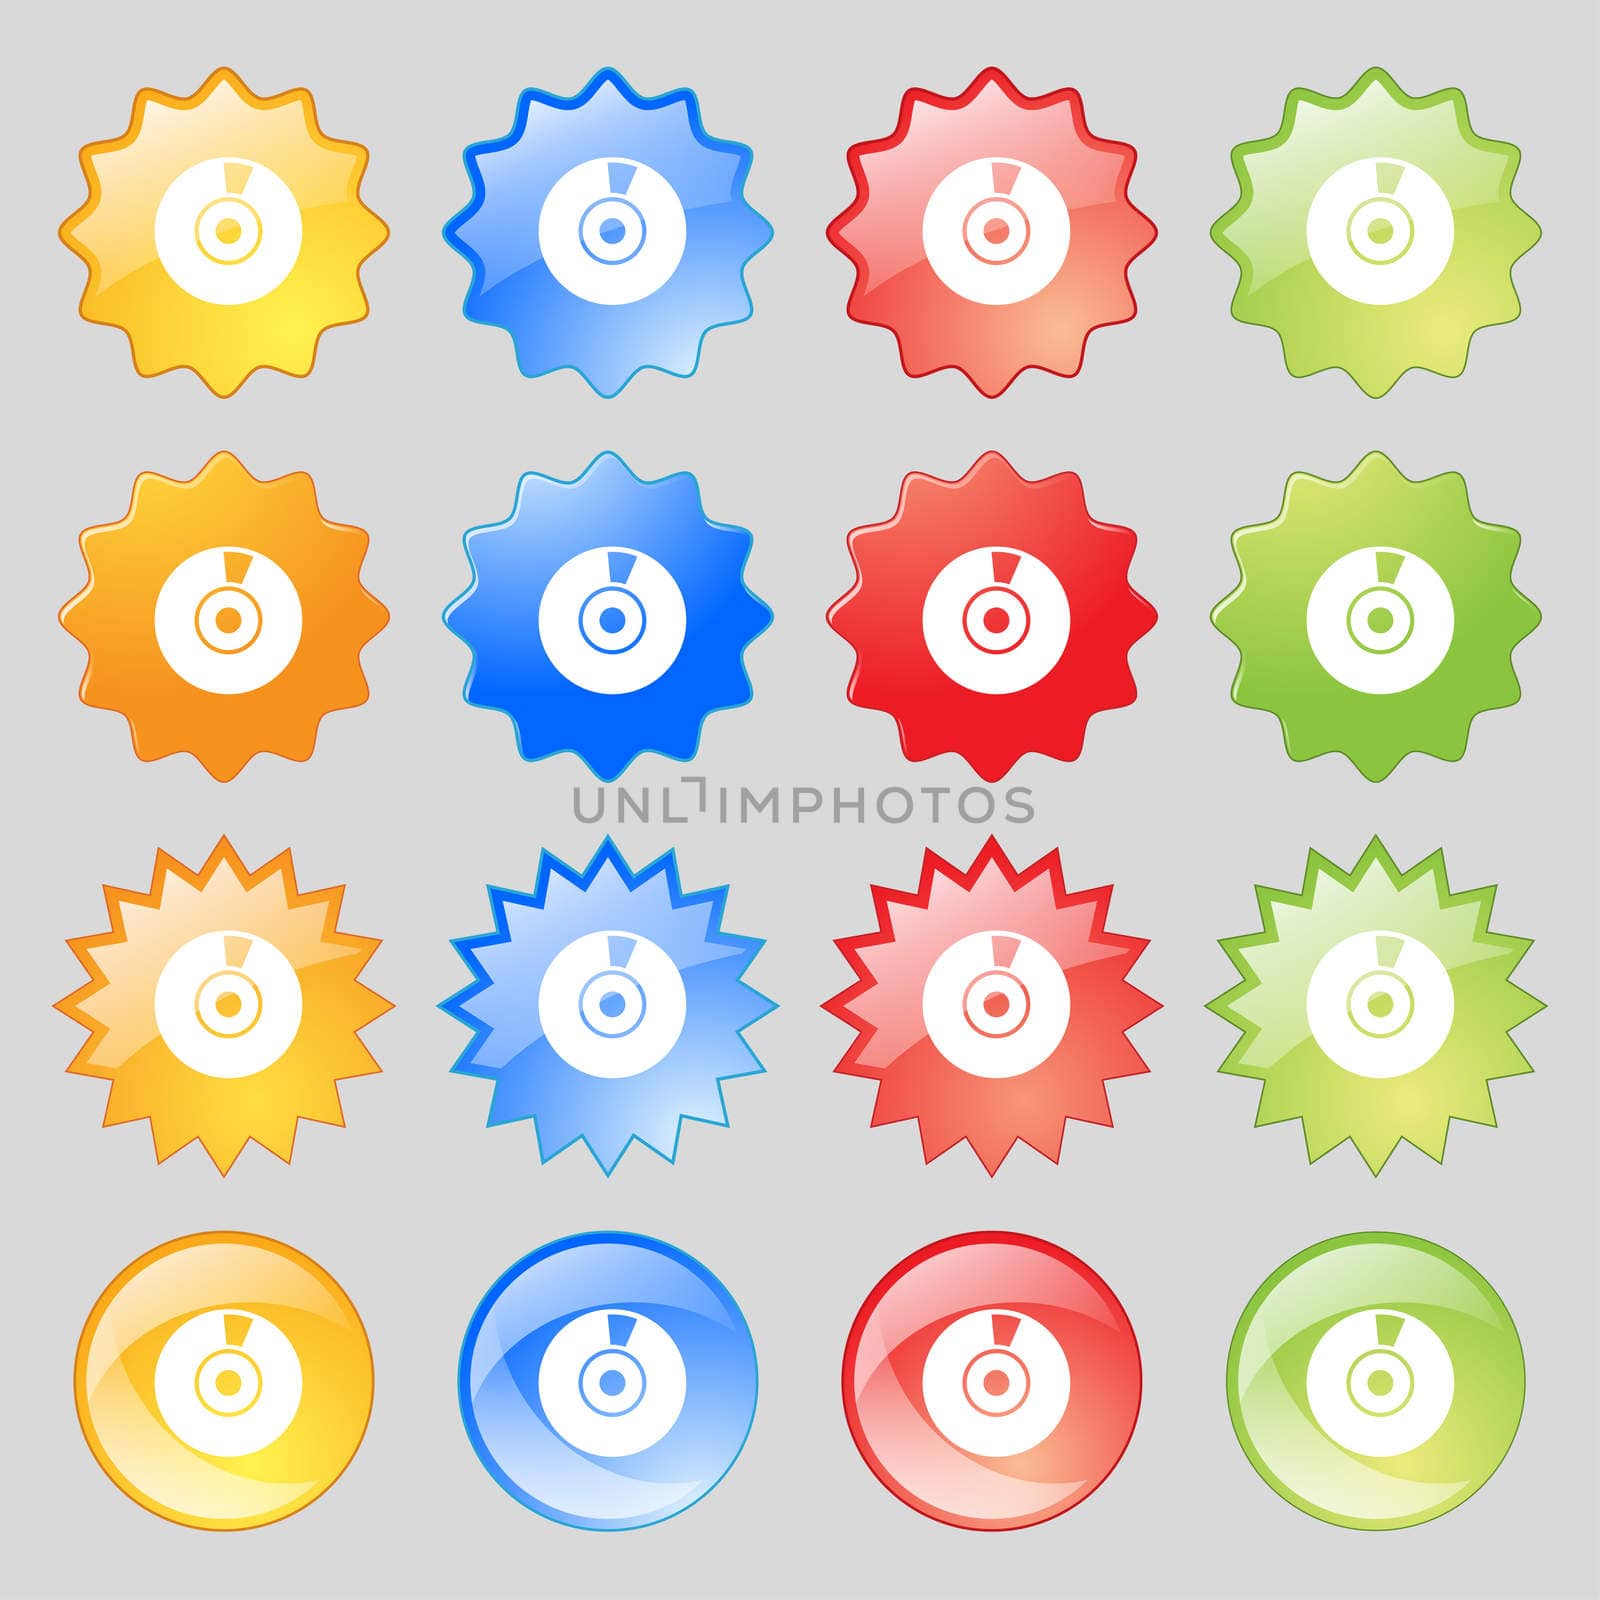 CD or DVD icon sign. Big set of 16 colorful modern buttons for your design. illustration